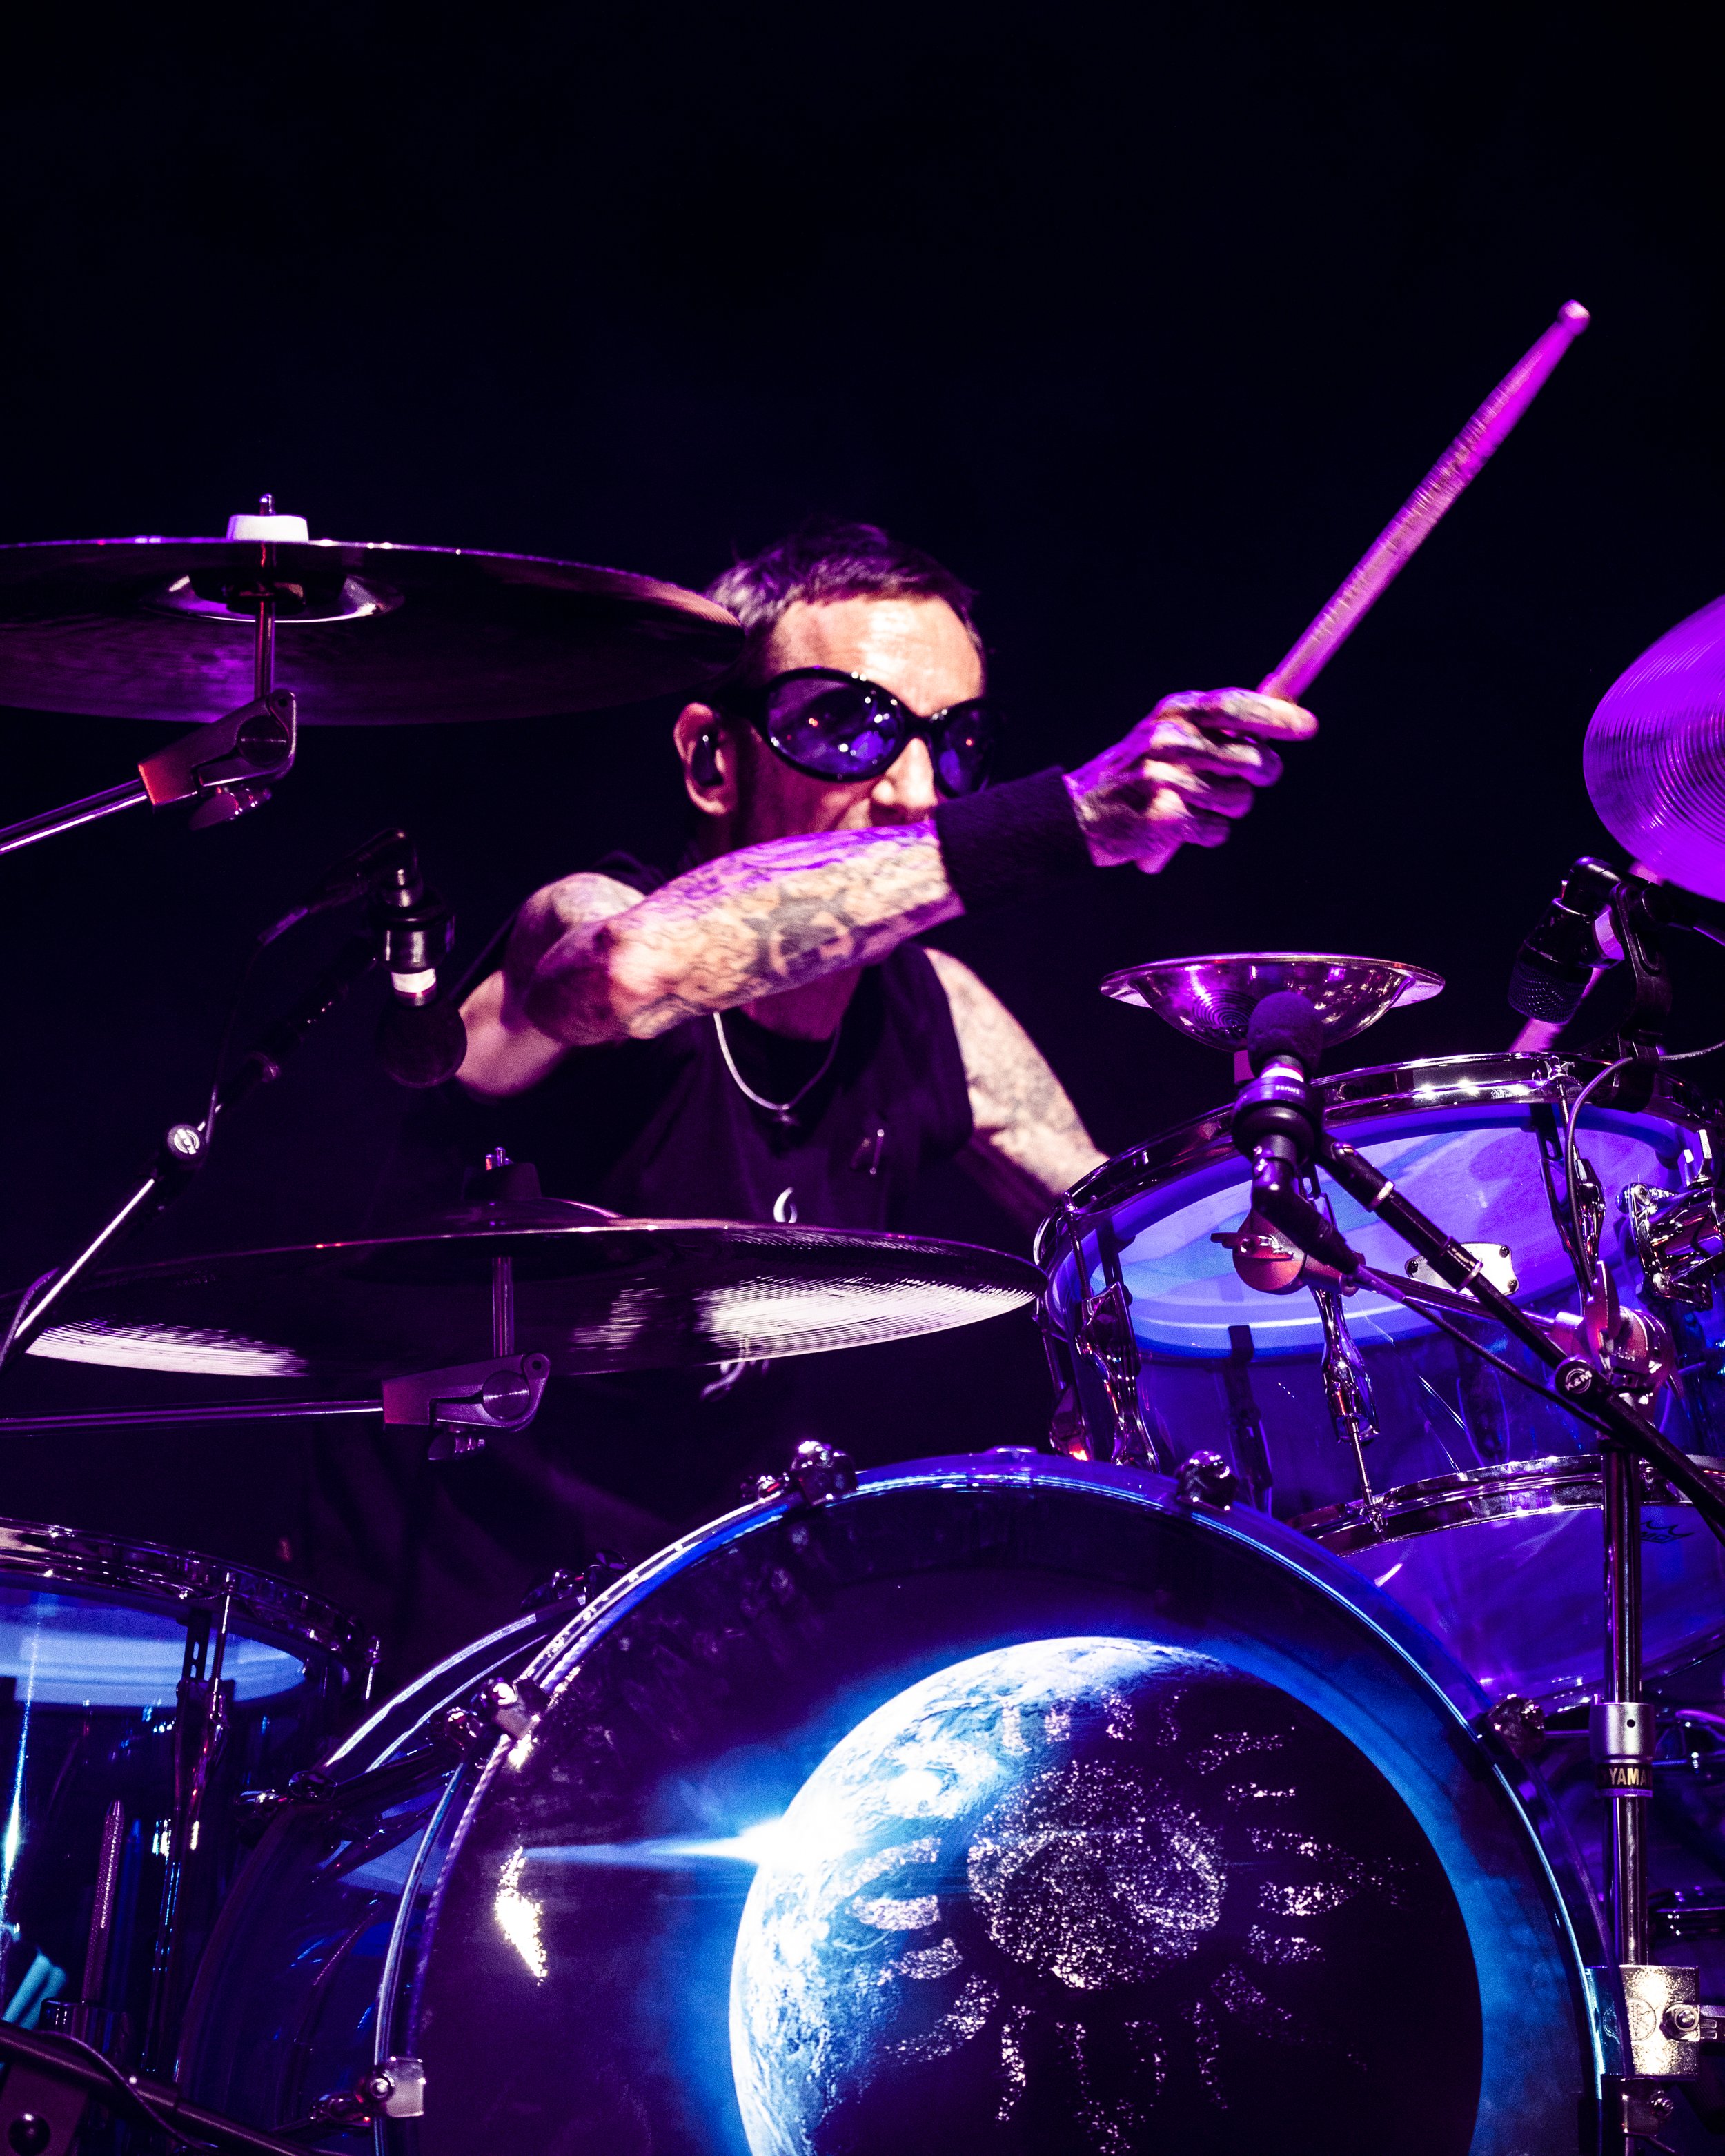 Godsmack, I Prevail, Bad Omens, Fame On Fire - 107.9 KBPI BIRTHDAY BASH - Fiddler's Green Amphitheatre - Greenwood Village, Colorado - Thursday, May 4, 2023- PHOTO BY Mowgli Miles of Interracial Friends-179.JPG